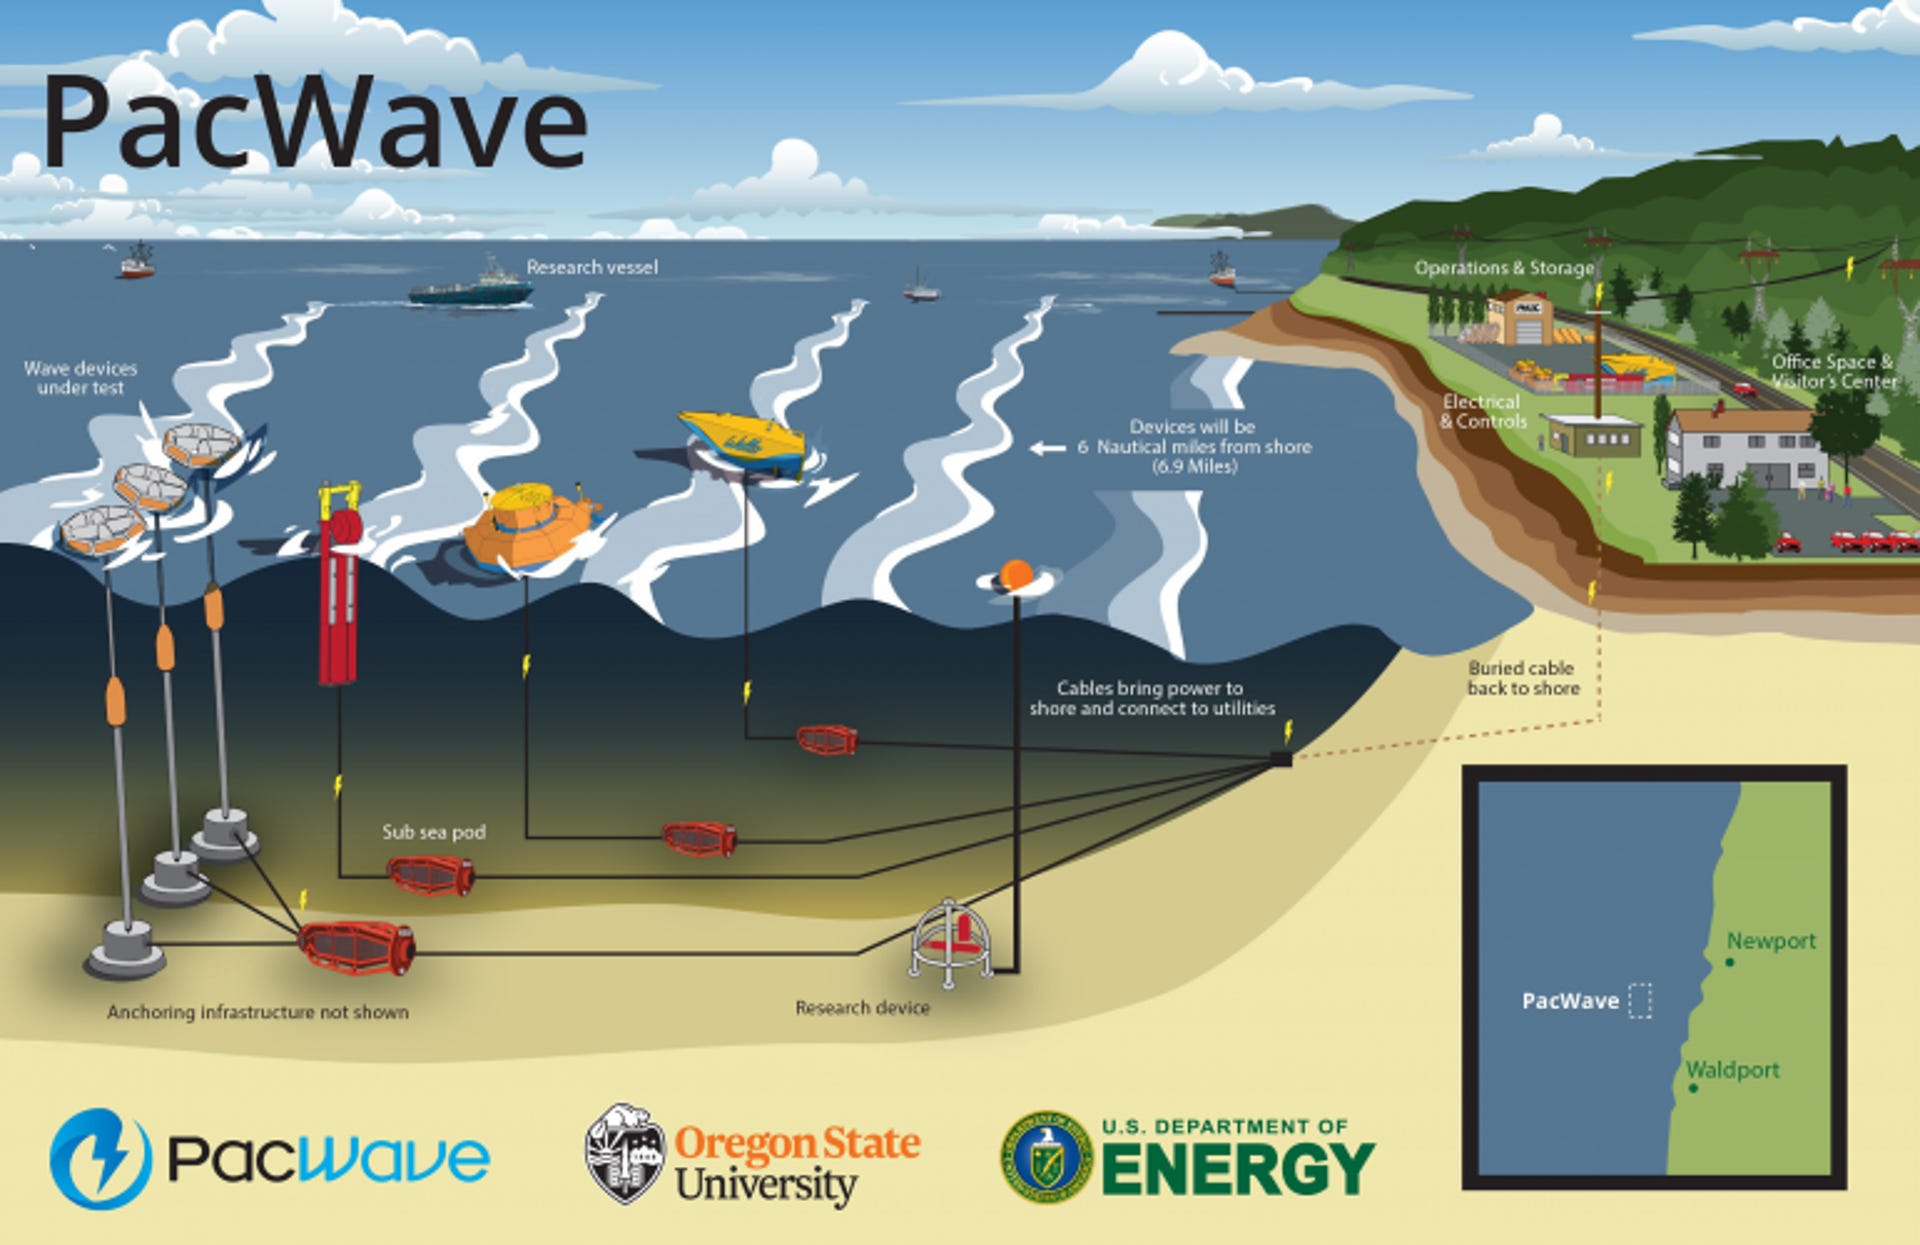 An illustration of PacWave's planned infrastructure